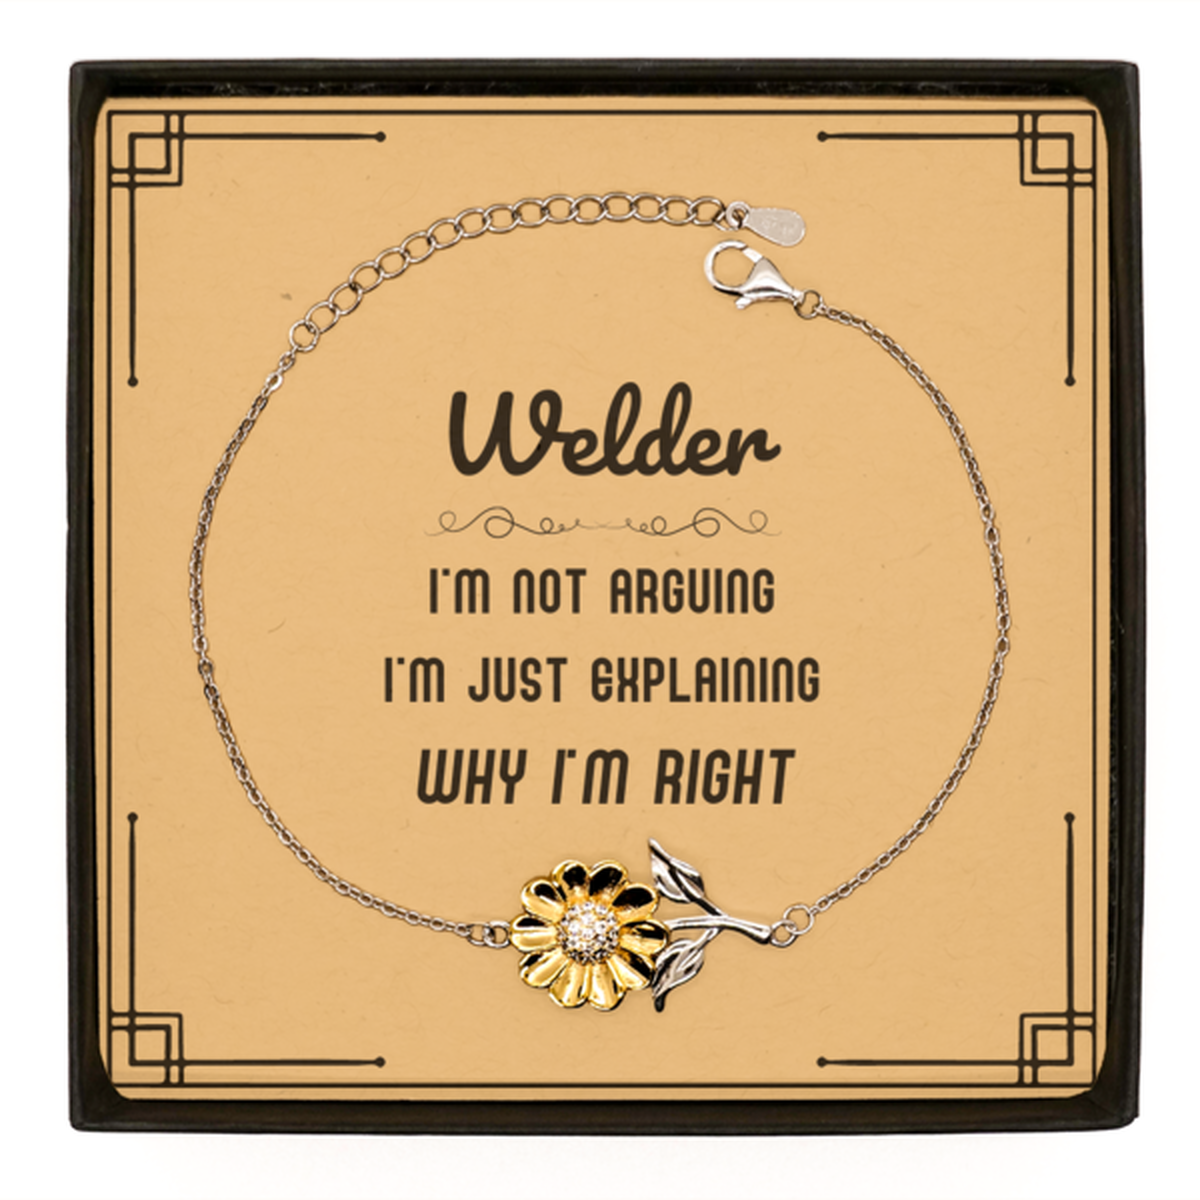 Welder I'm not Arguing. I'm Just Explaining Why I'm RIGHT Sunflower Bracelet, Funny Saying Quote Welder Gifts For Welder Message Card Graduation Birthday Christmas Gifts for Men Women Coworker